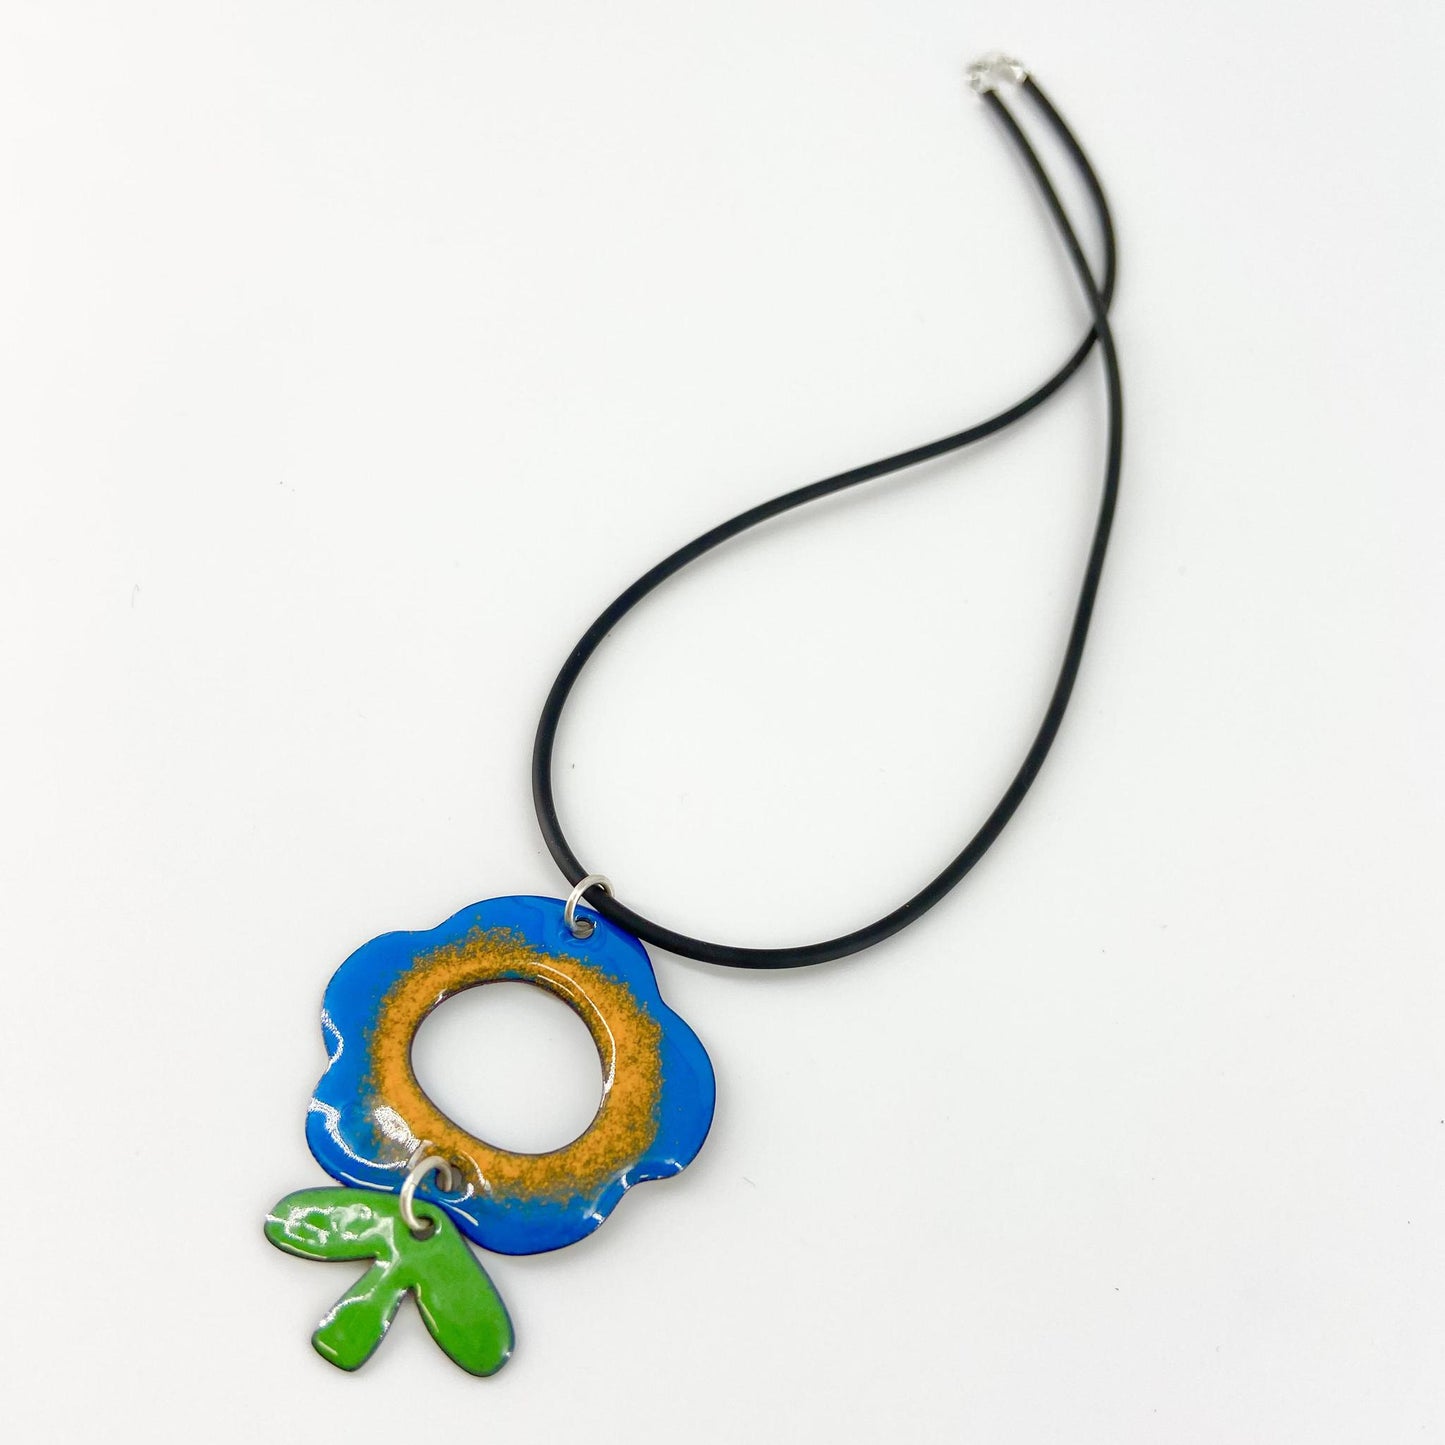 Necklace - Flower & Leaf - Blue/Yellow (Video)